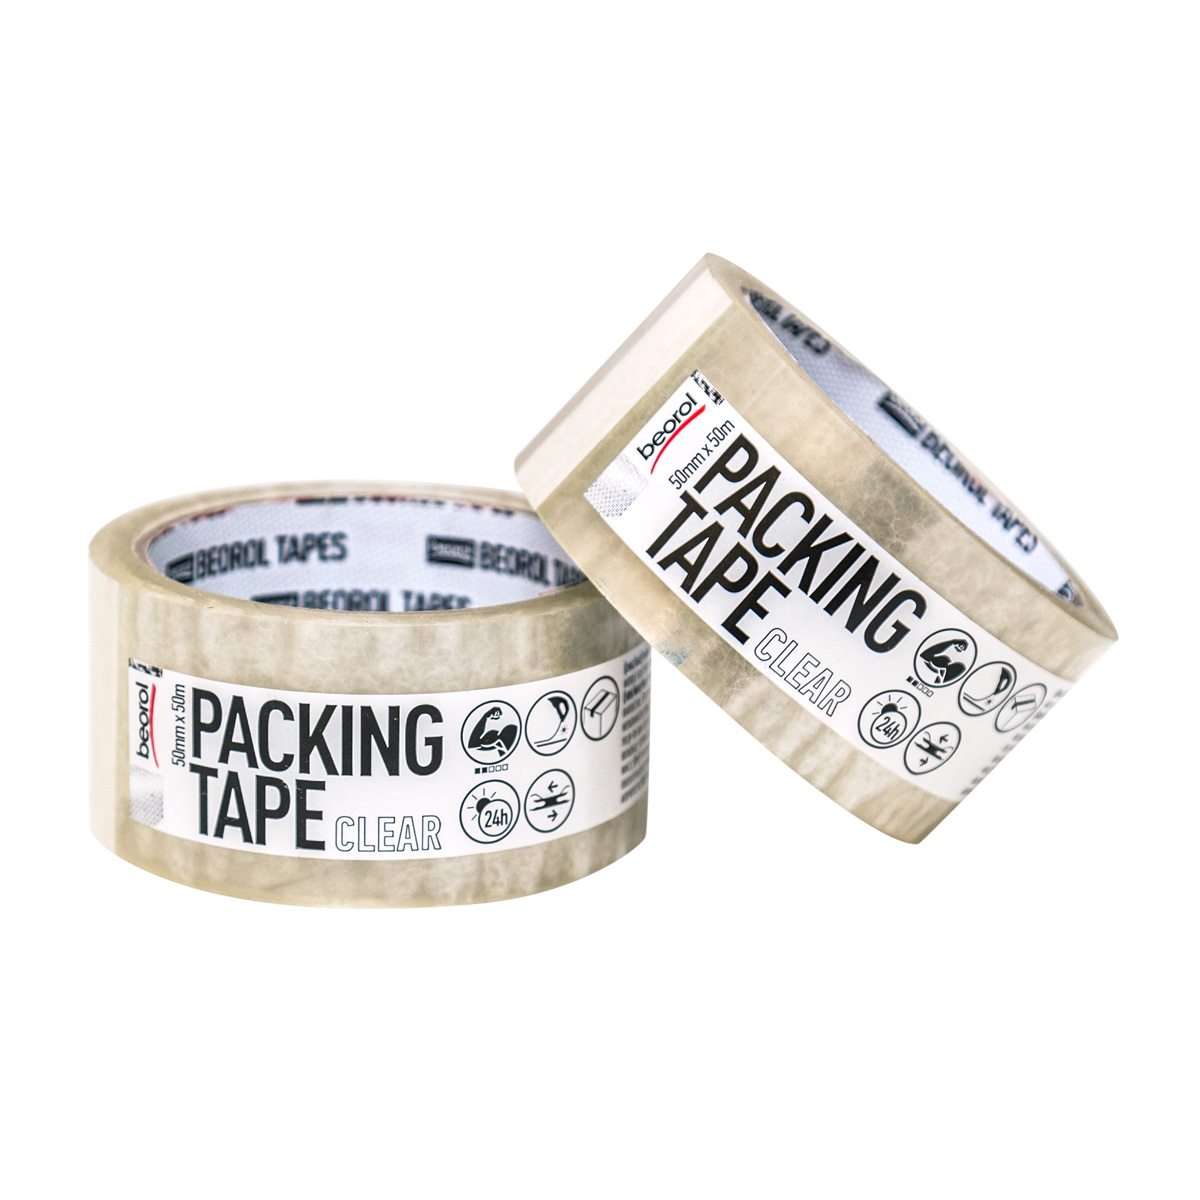 Packing tape 50mm x 50m S50x50